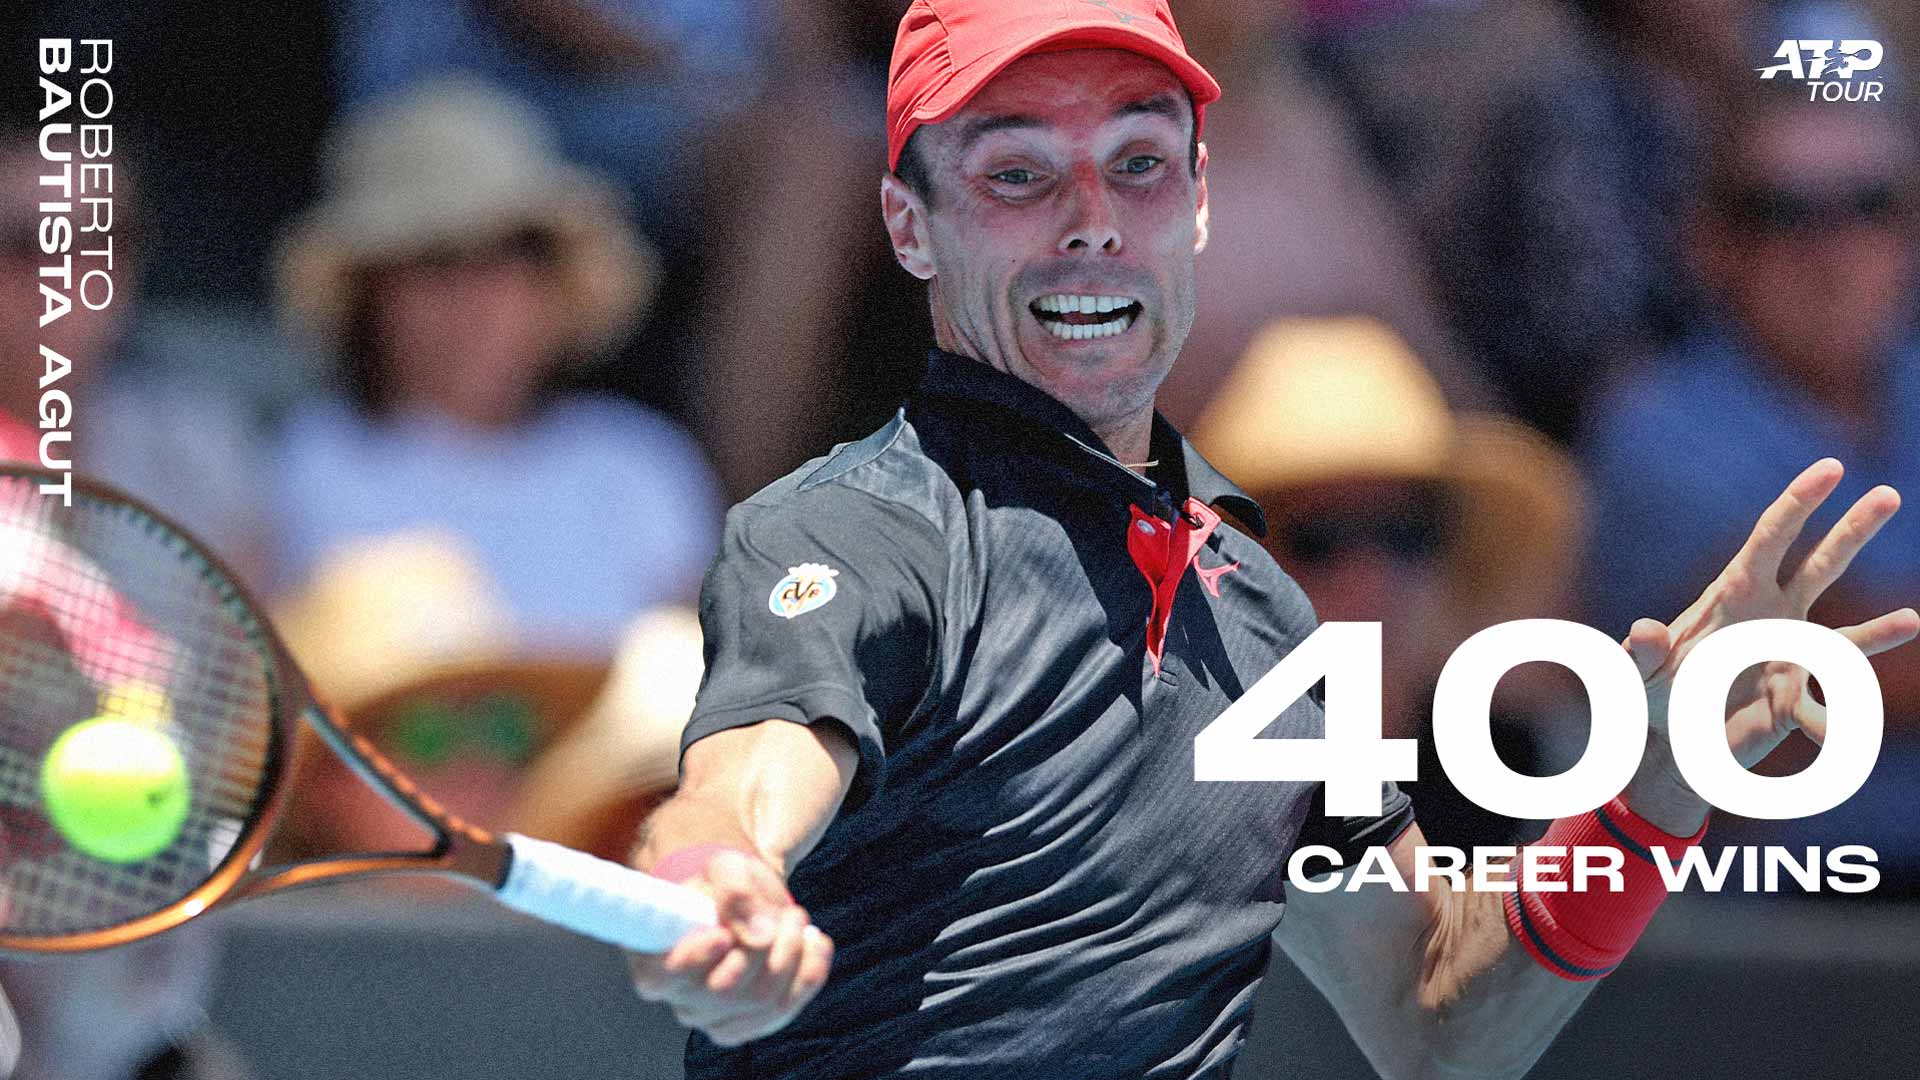 Roberto Bautista Agut reached his career-high of No. 9 in the PIF ATP Rankings in 2019.